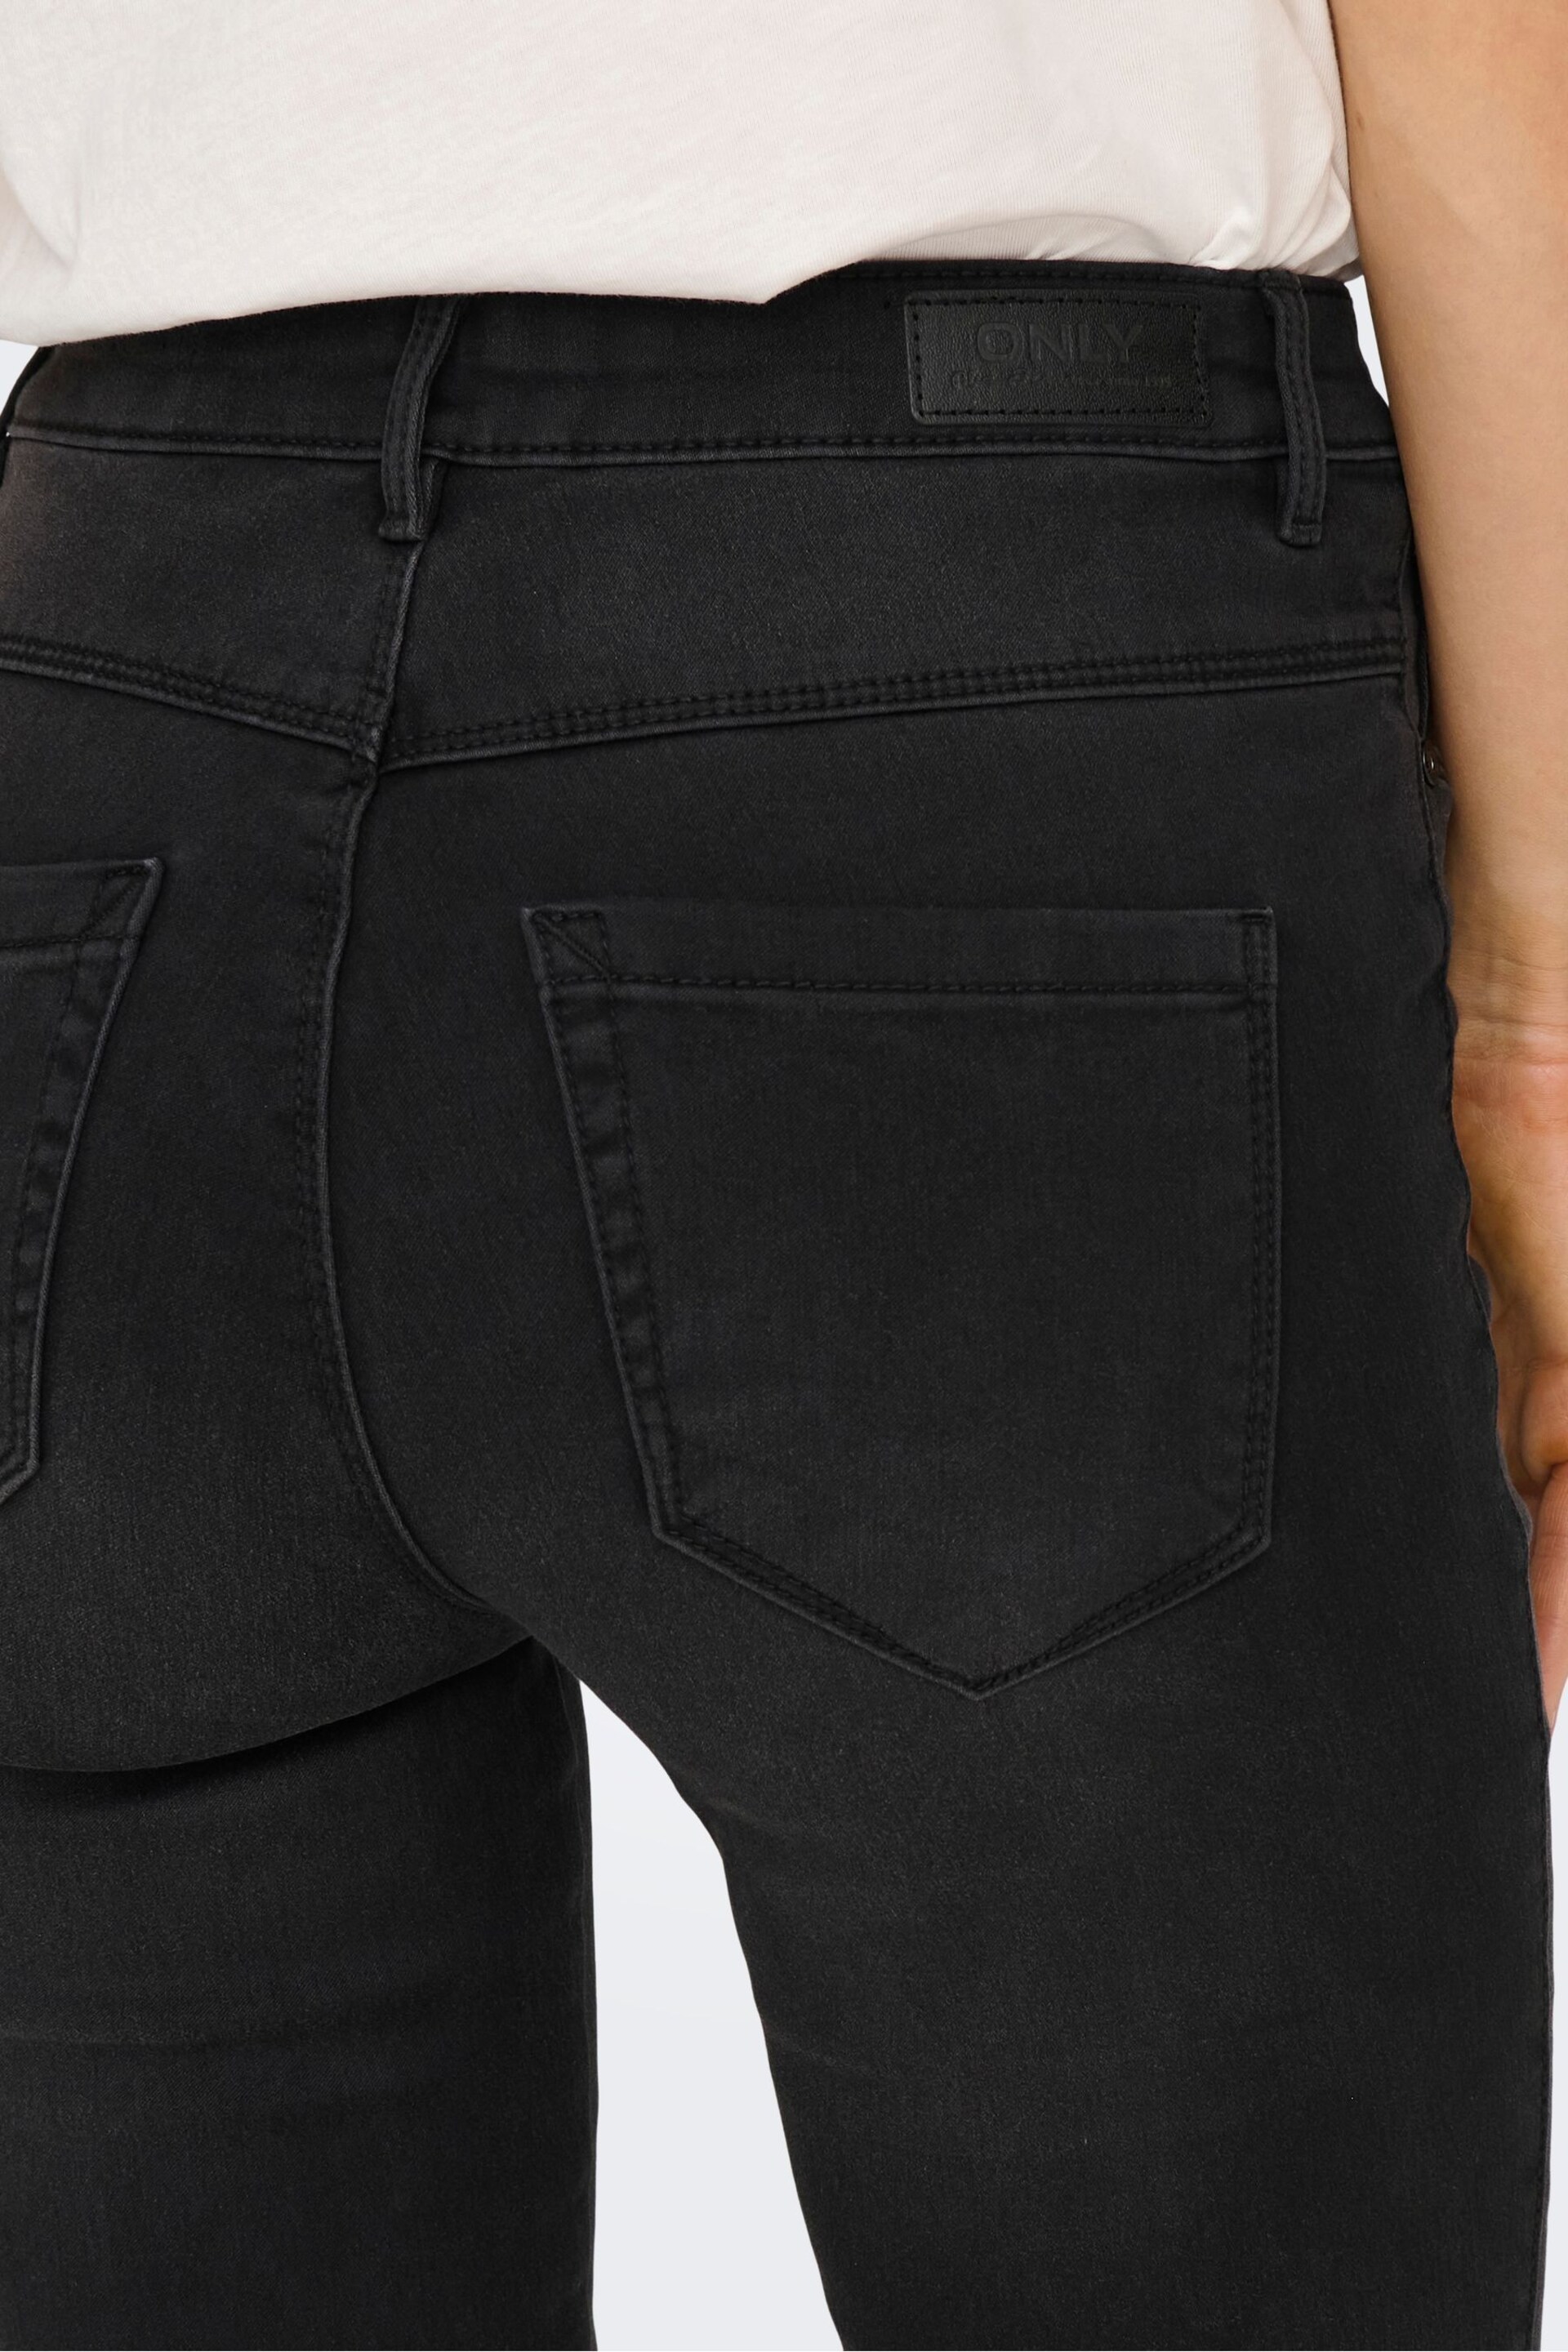 ONLY Black High Waisted Stretch Skinny Jeans - Image 4 of 5